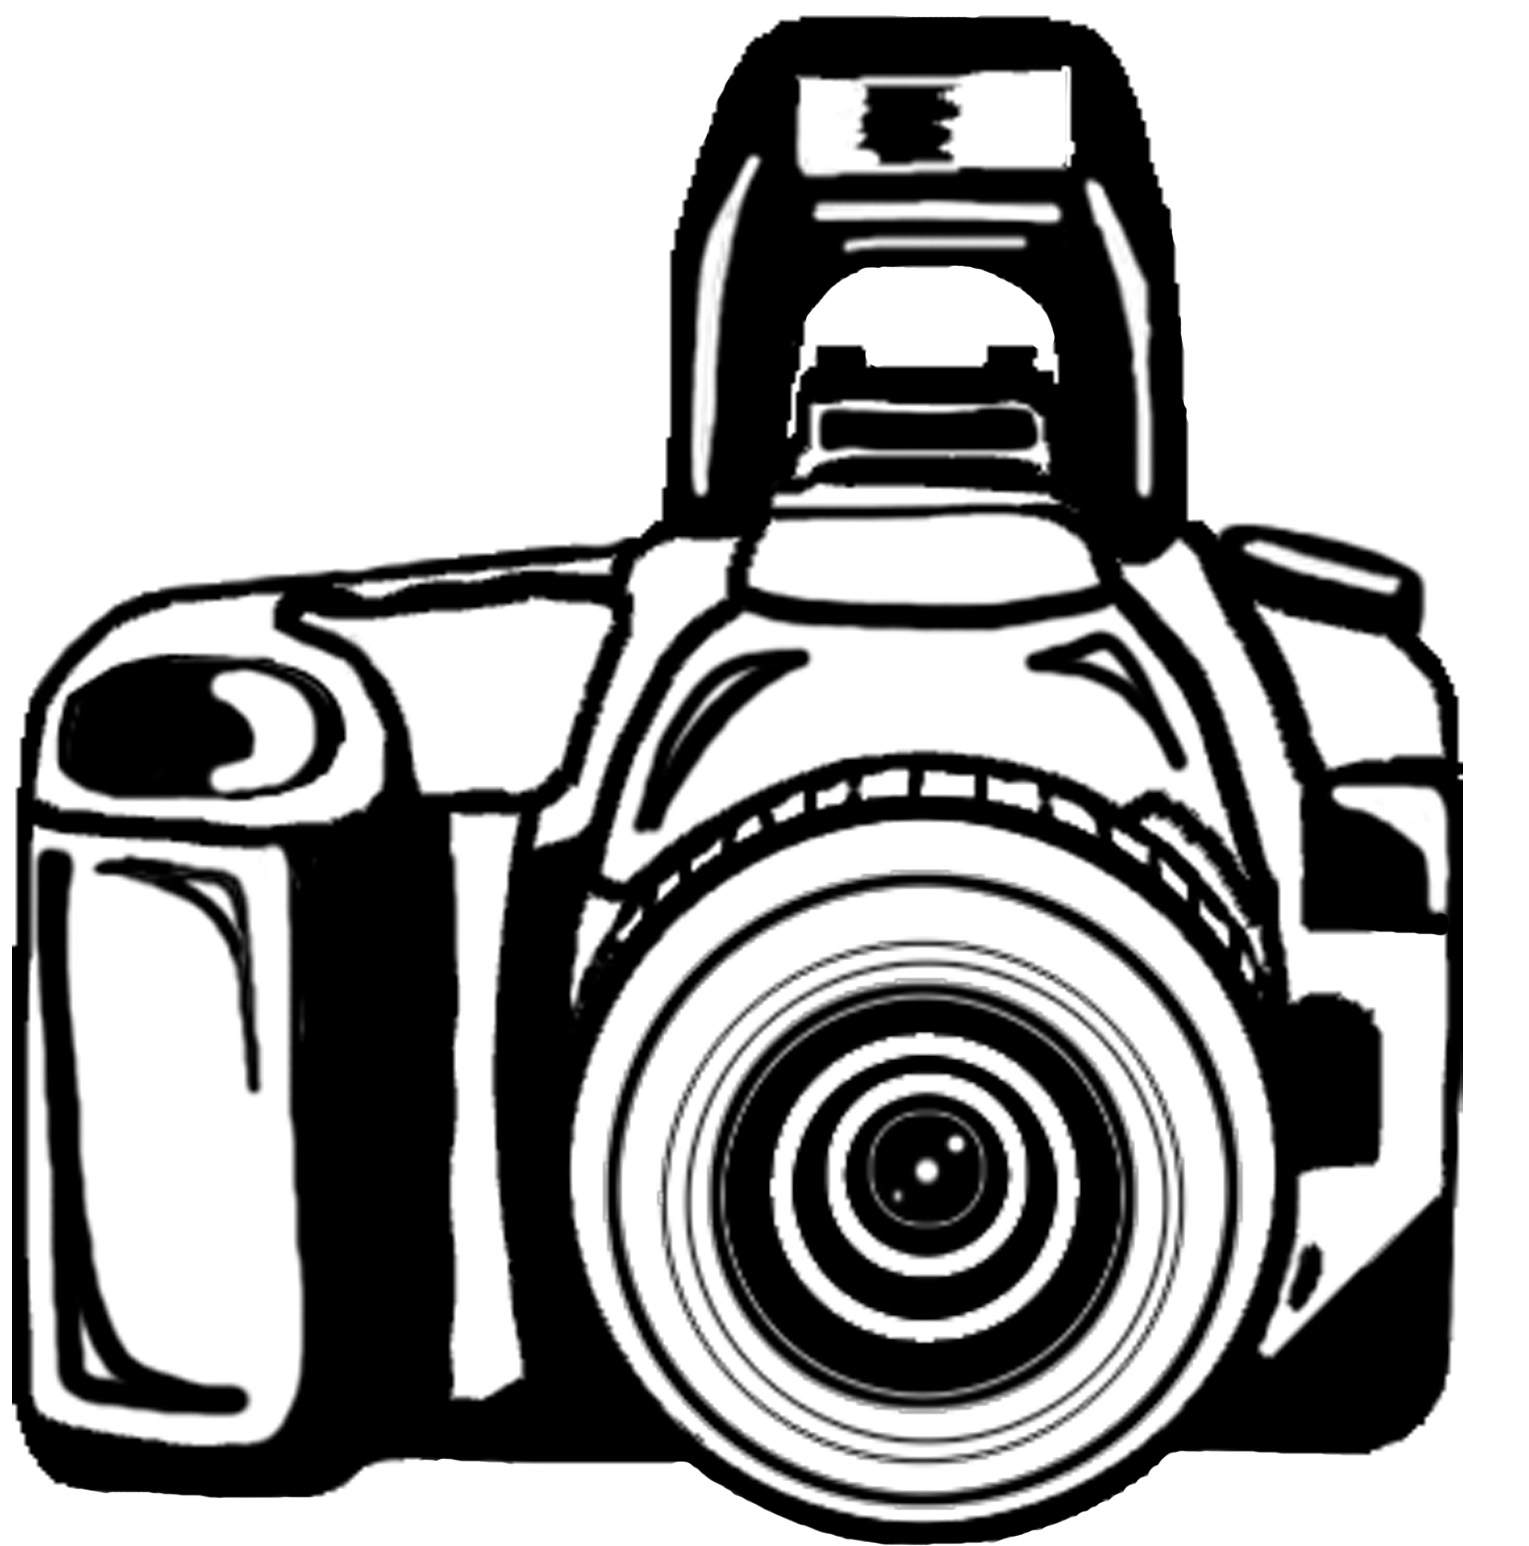 This is a picture of a camera. 